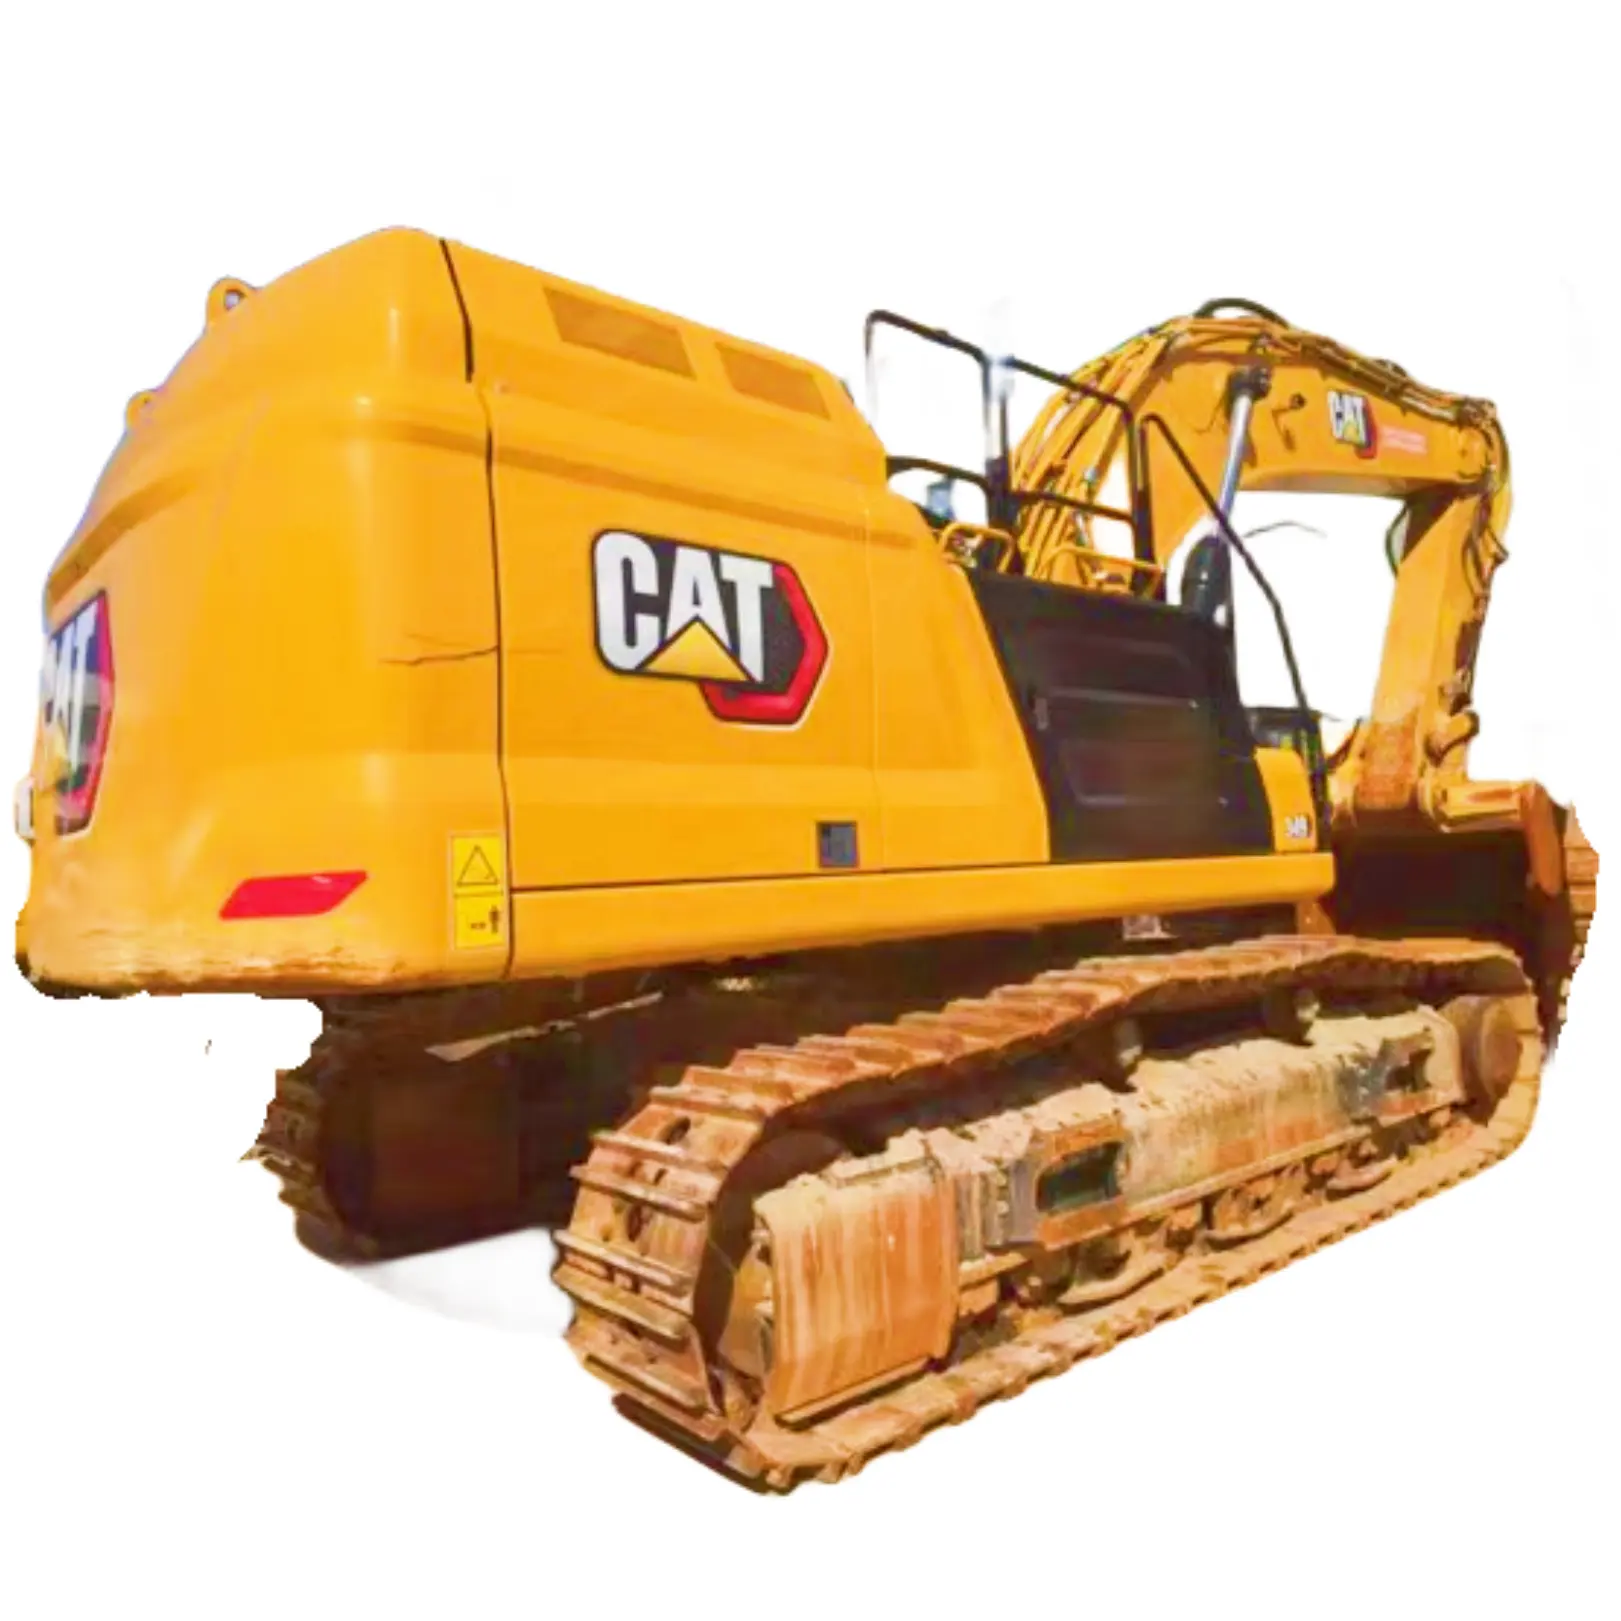 Used Good Working Condition CAT349 Hot Sale 49 ton Hydraulic Heavy Equipment Cat349 Earth-moving Caterpillar Excavators on Stock